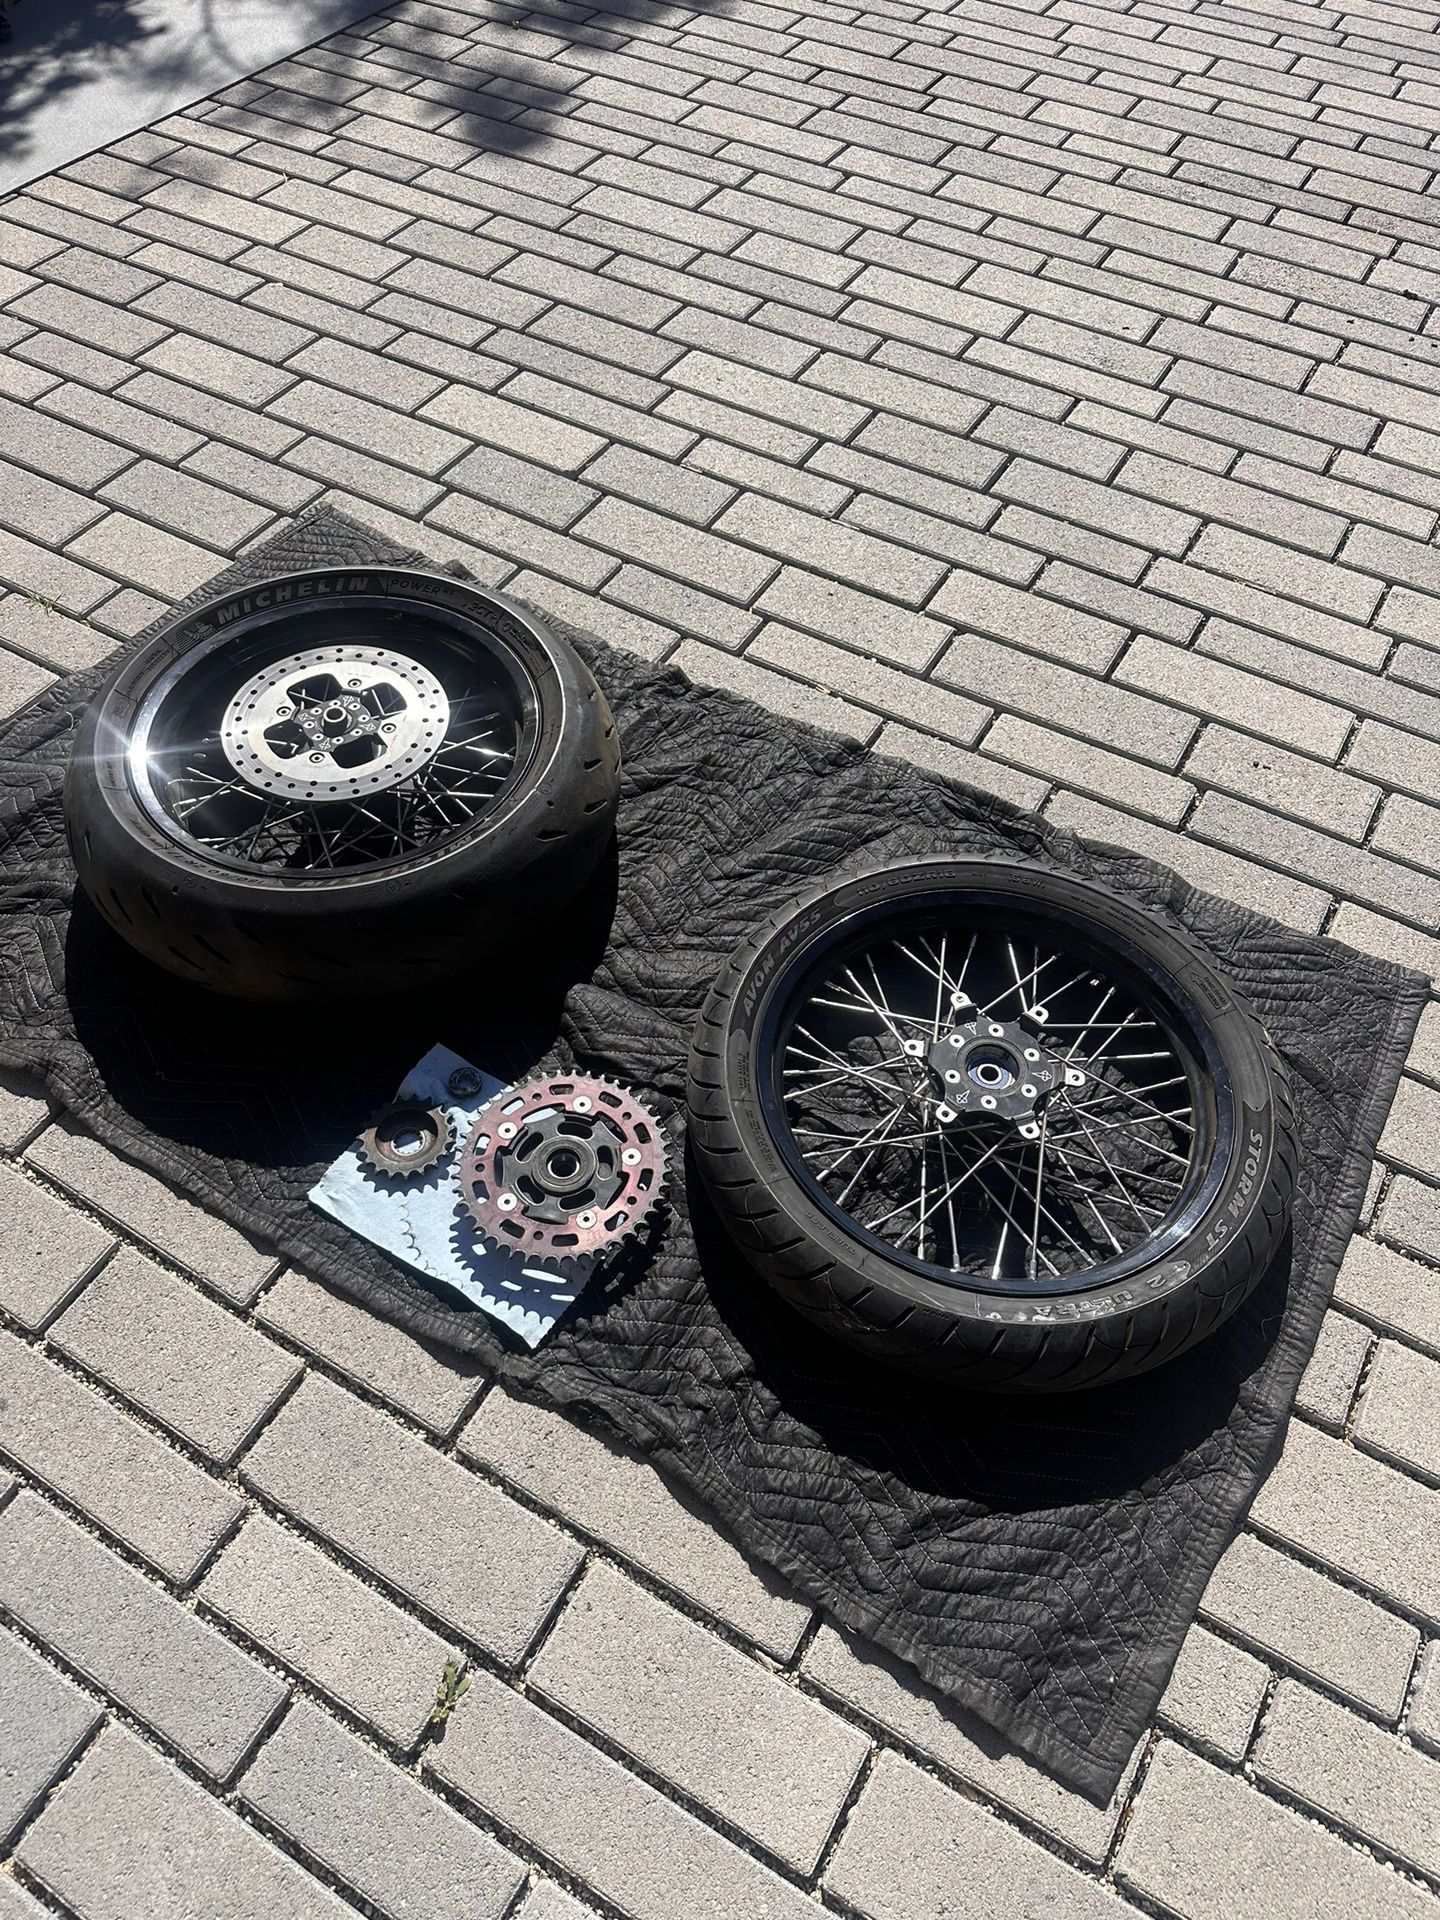 Canyon Motorcycles, TTwheels Wide Wheel Kit For Air cooled Triumph Modern Classics